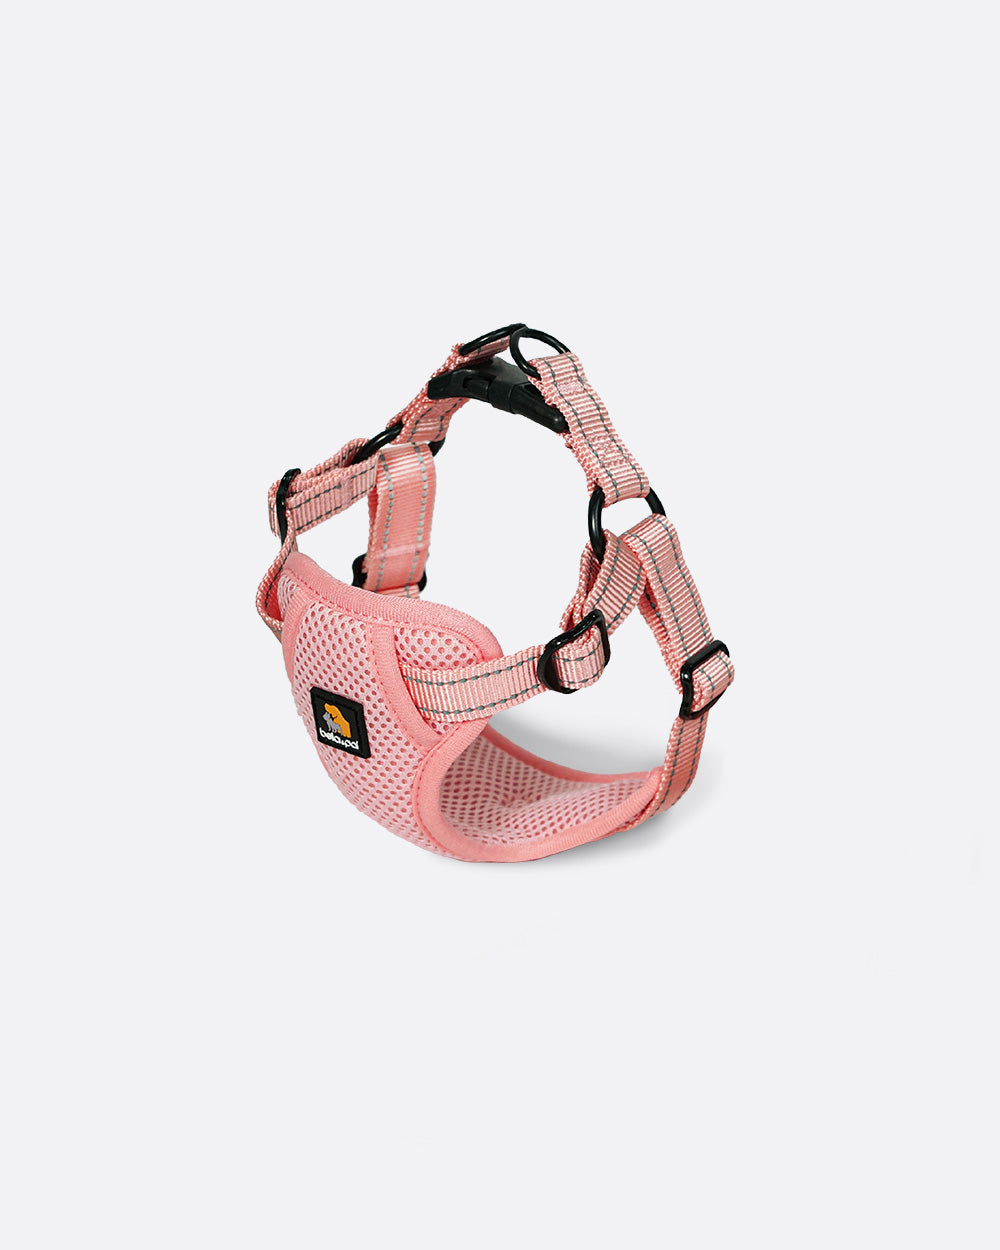 OxyMesh Flexi Step-in Harness - Coral Pink